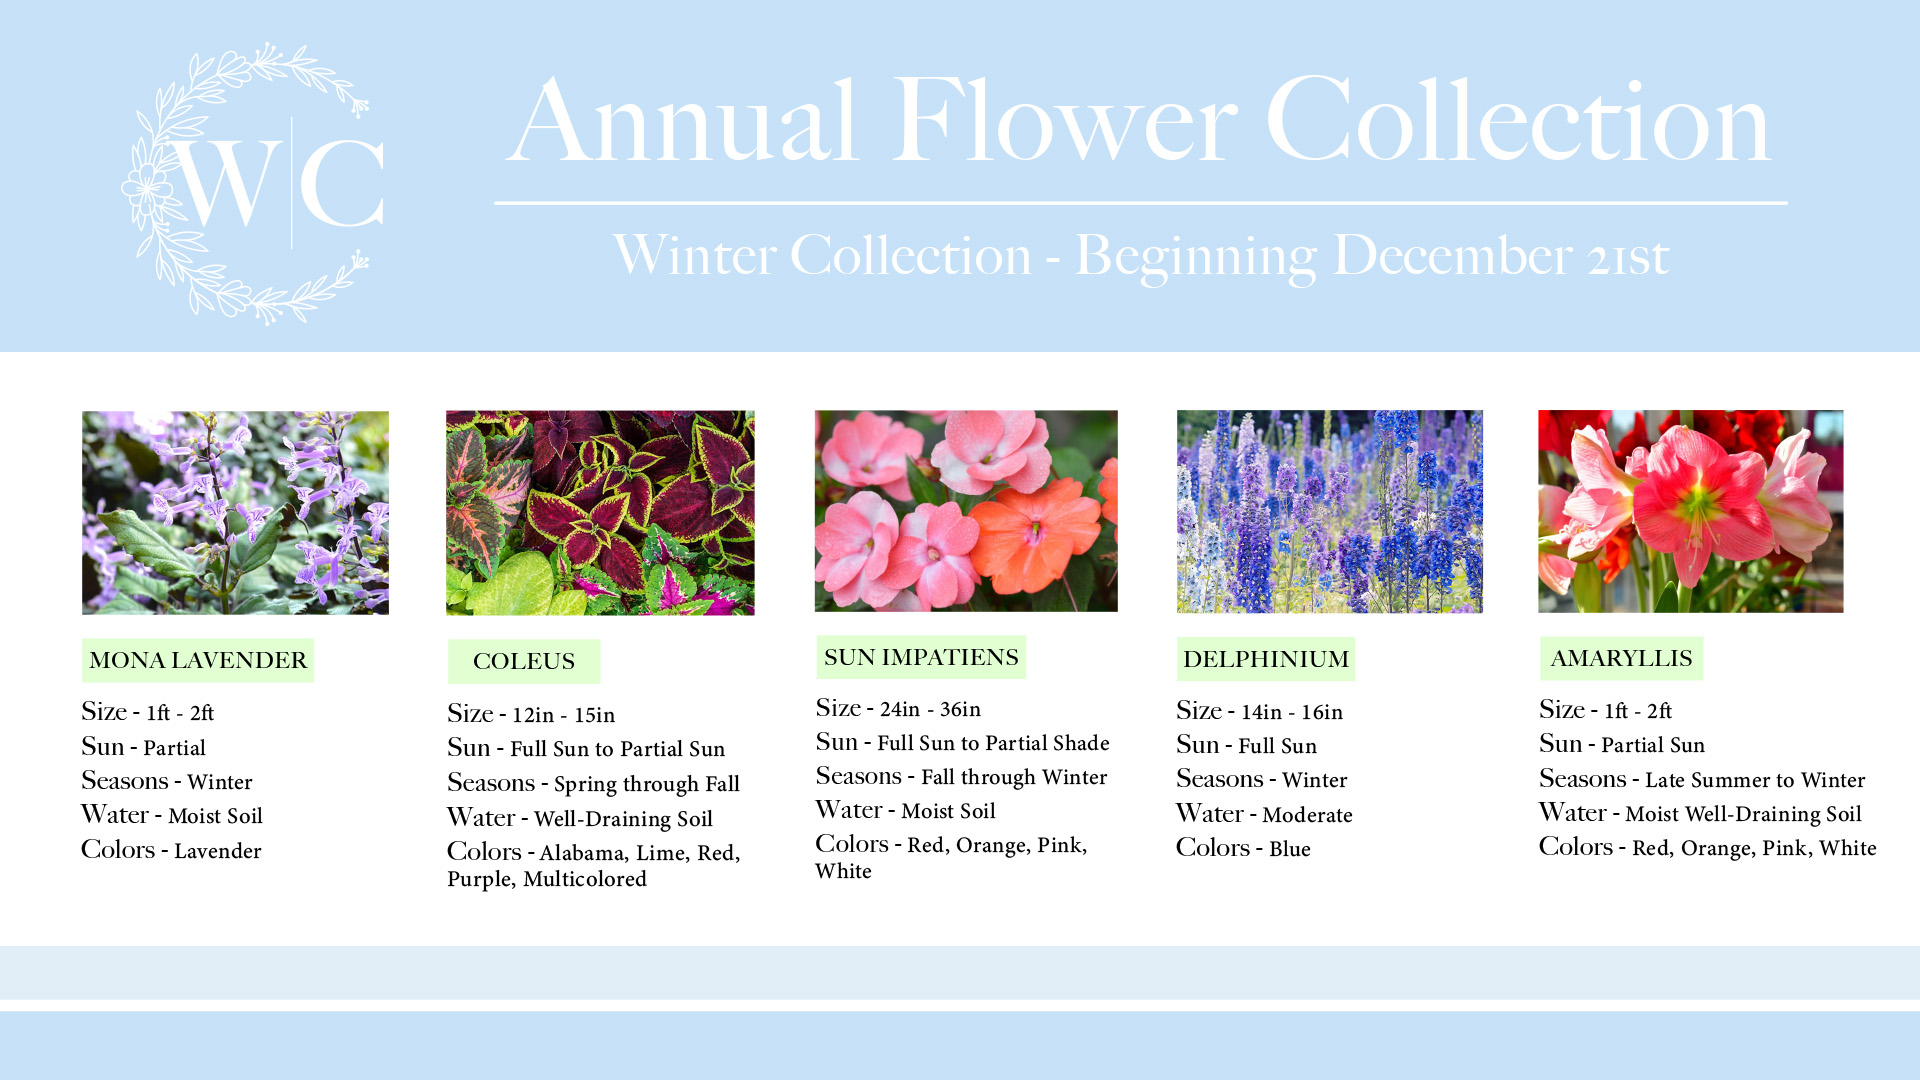 https://fortmyersgardenservice.com/wp-content/uploads/2022/11/FMGS-Annuals-Web-Graphics_Winter-Collection.jpg